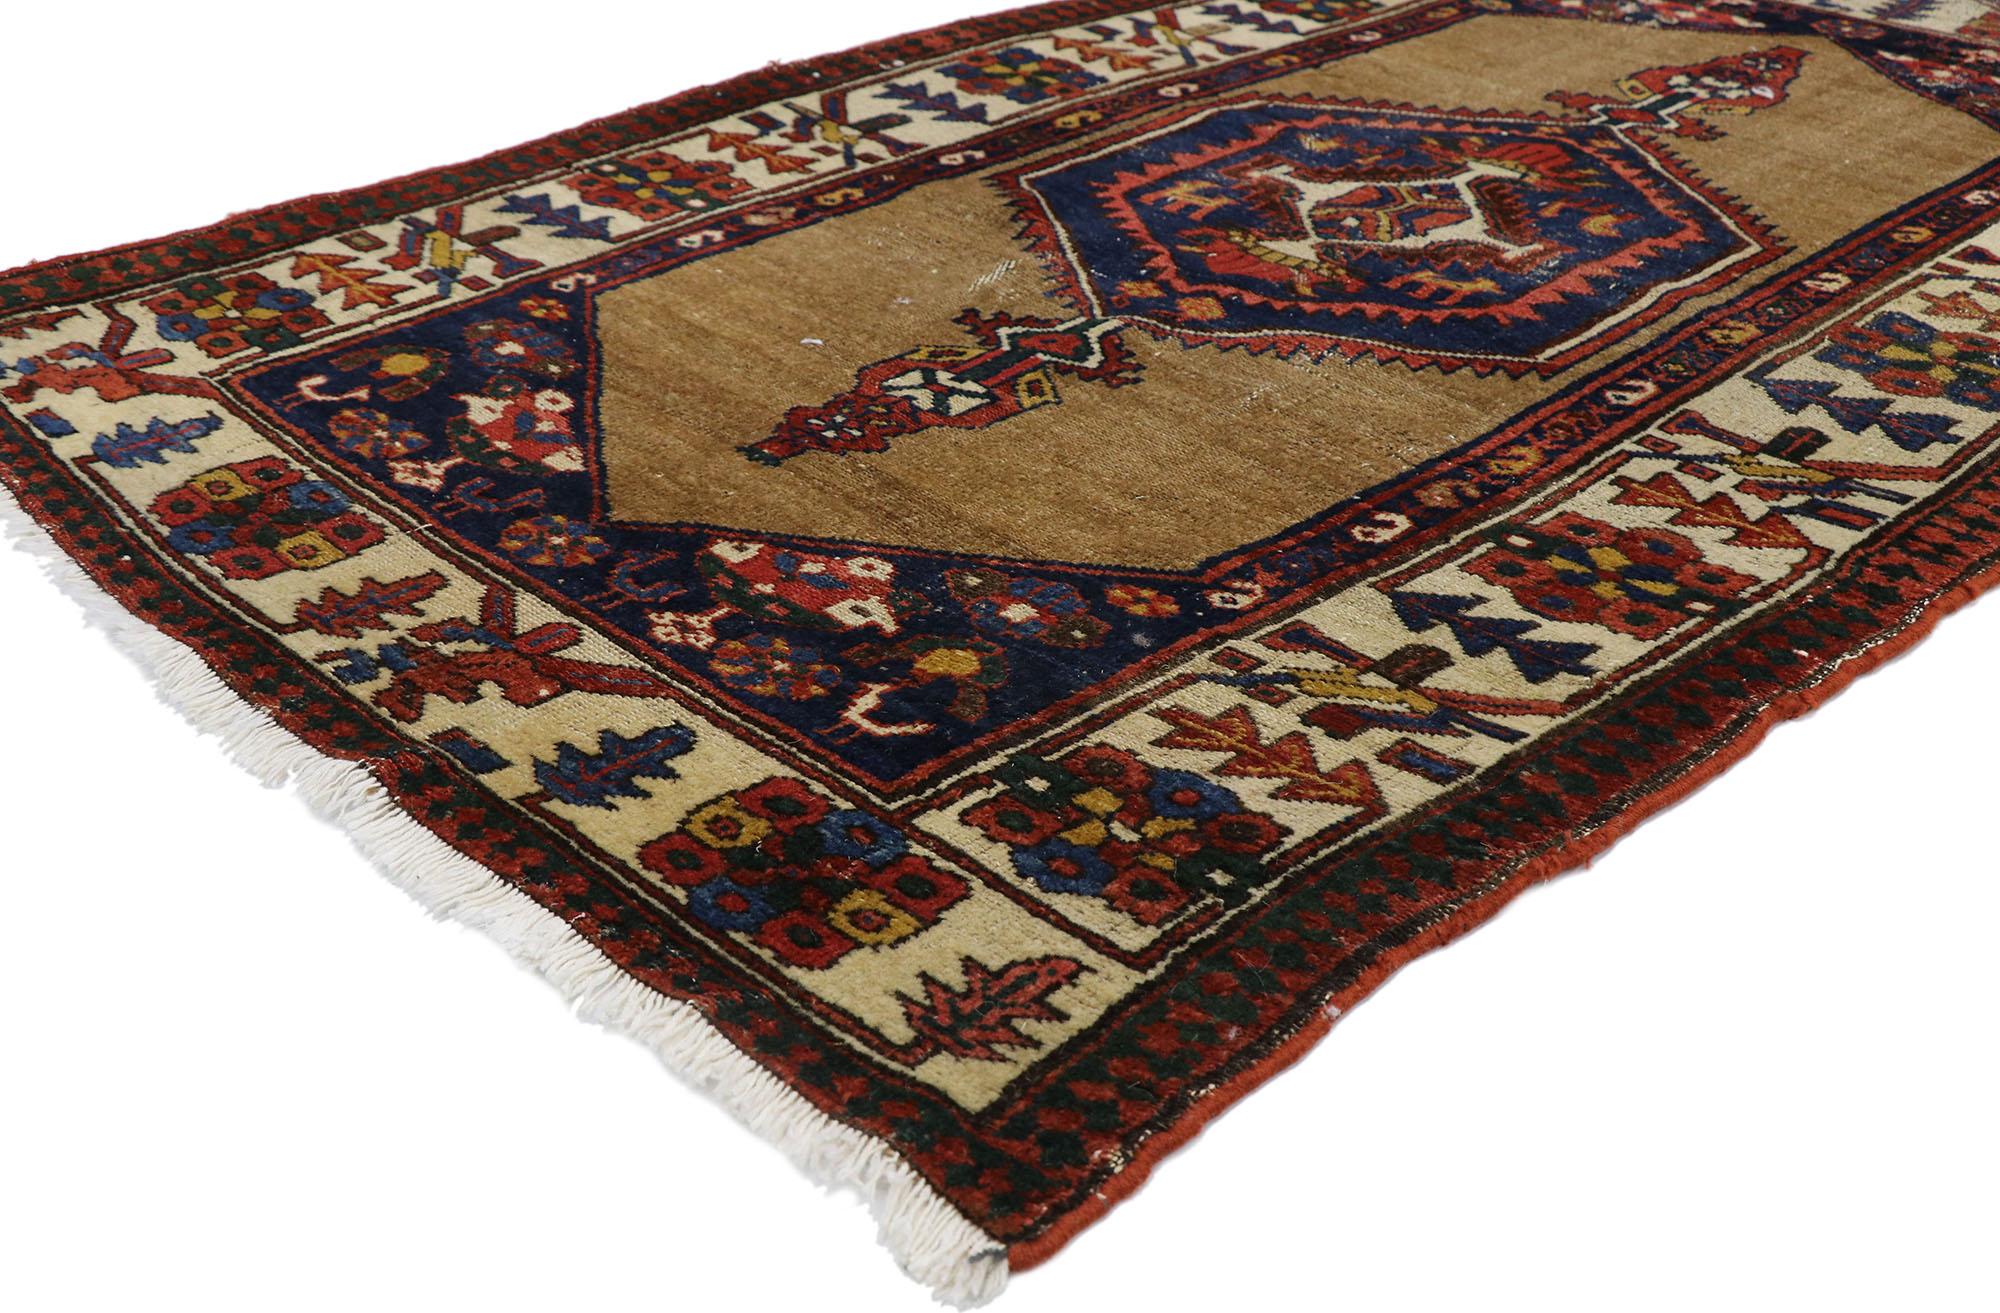 78023, antique Persian Malayer rug with Mid-Century Modern style. Emanating sophistication and nomadic charm with rustic sensibility, this hand knotted wool distressed antique Persian Malayer rug beautifully embodies a Mid-Century Modern style. The